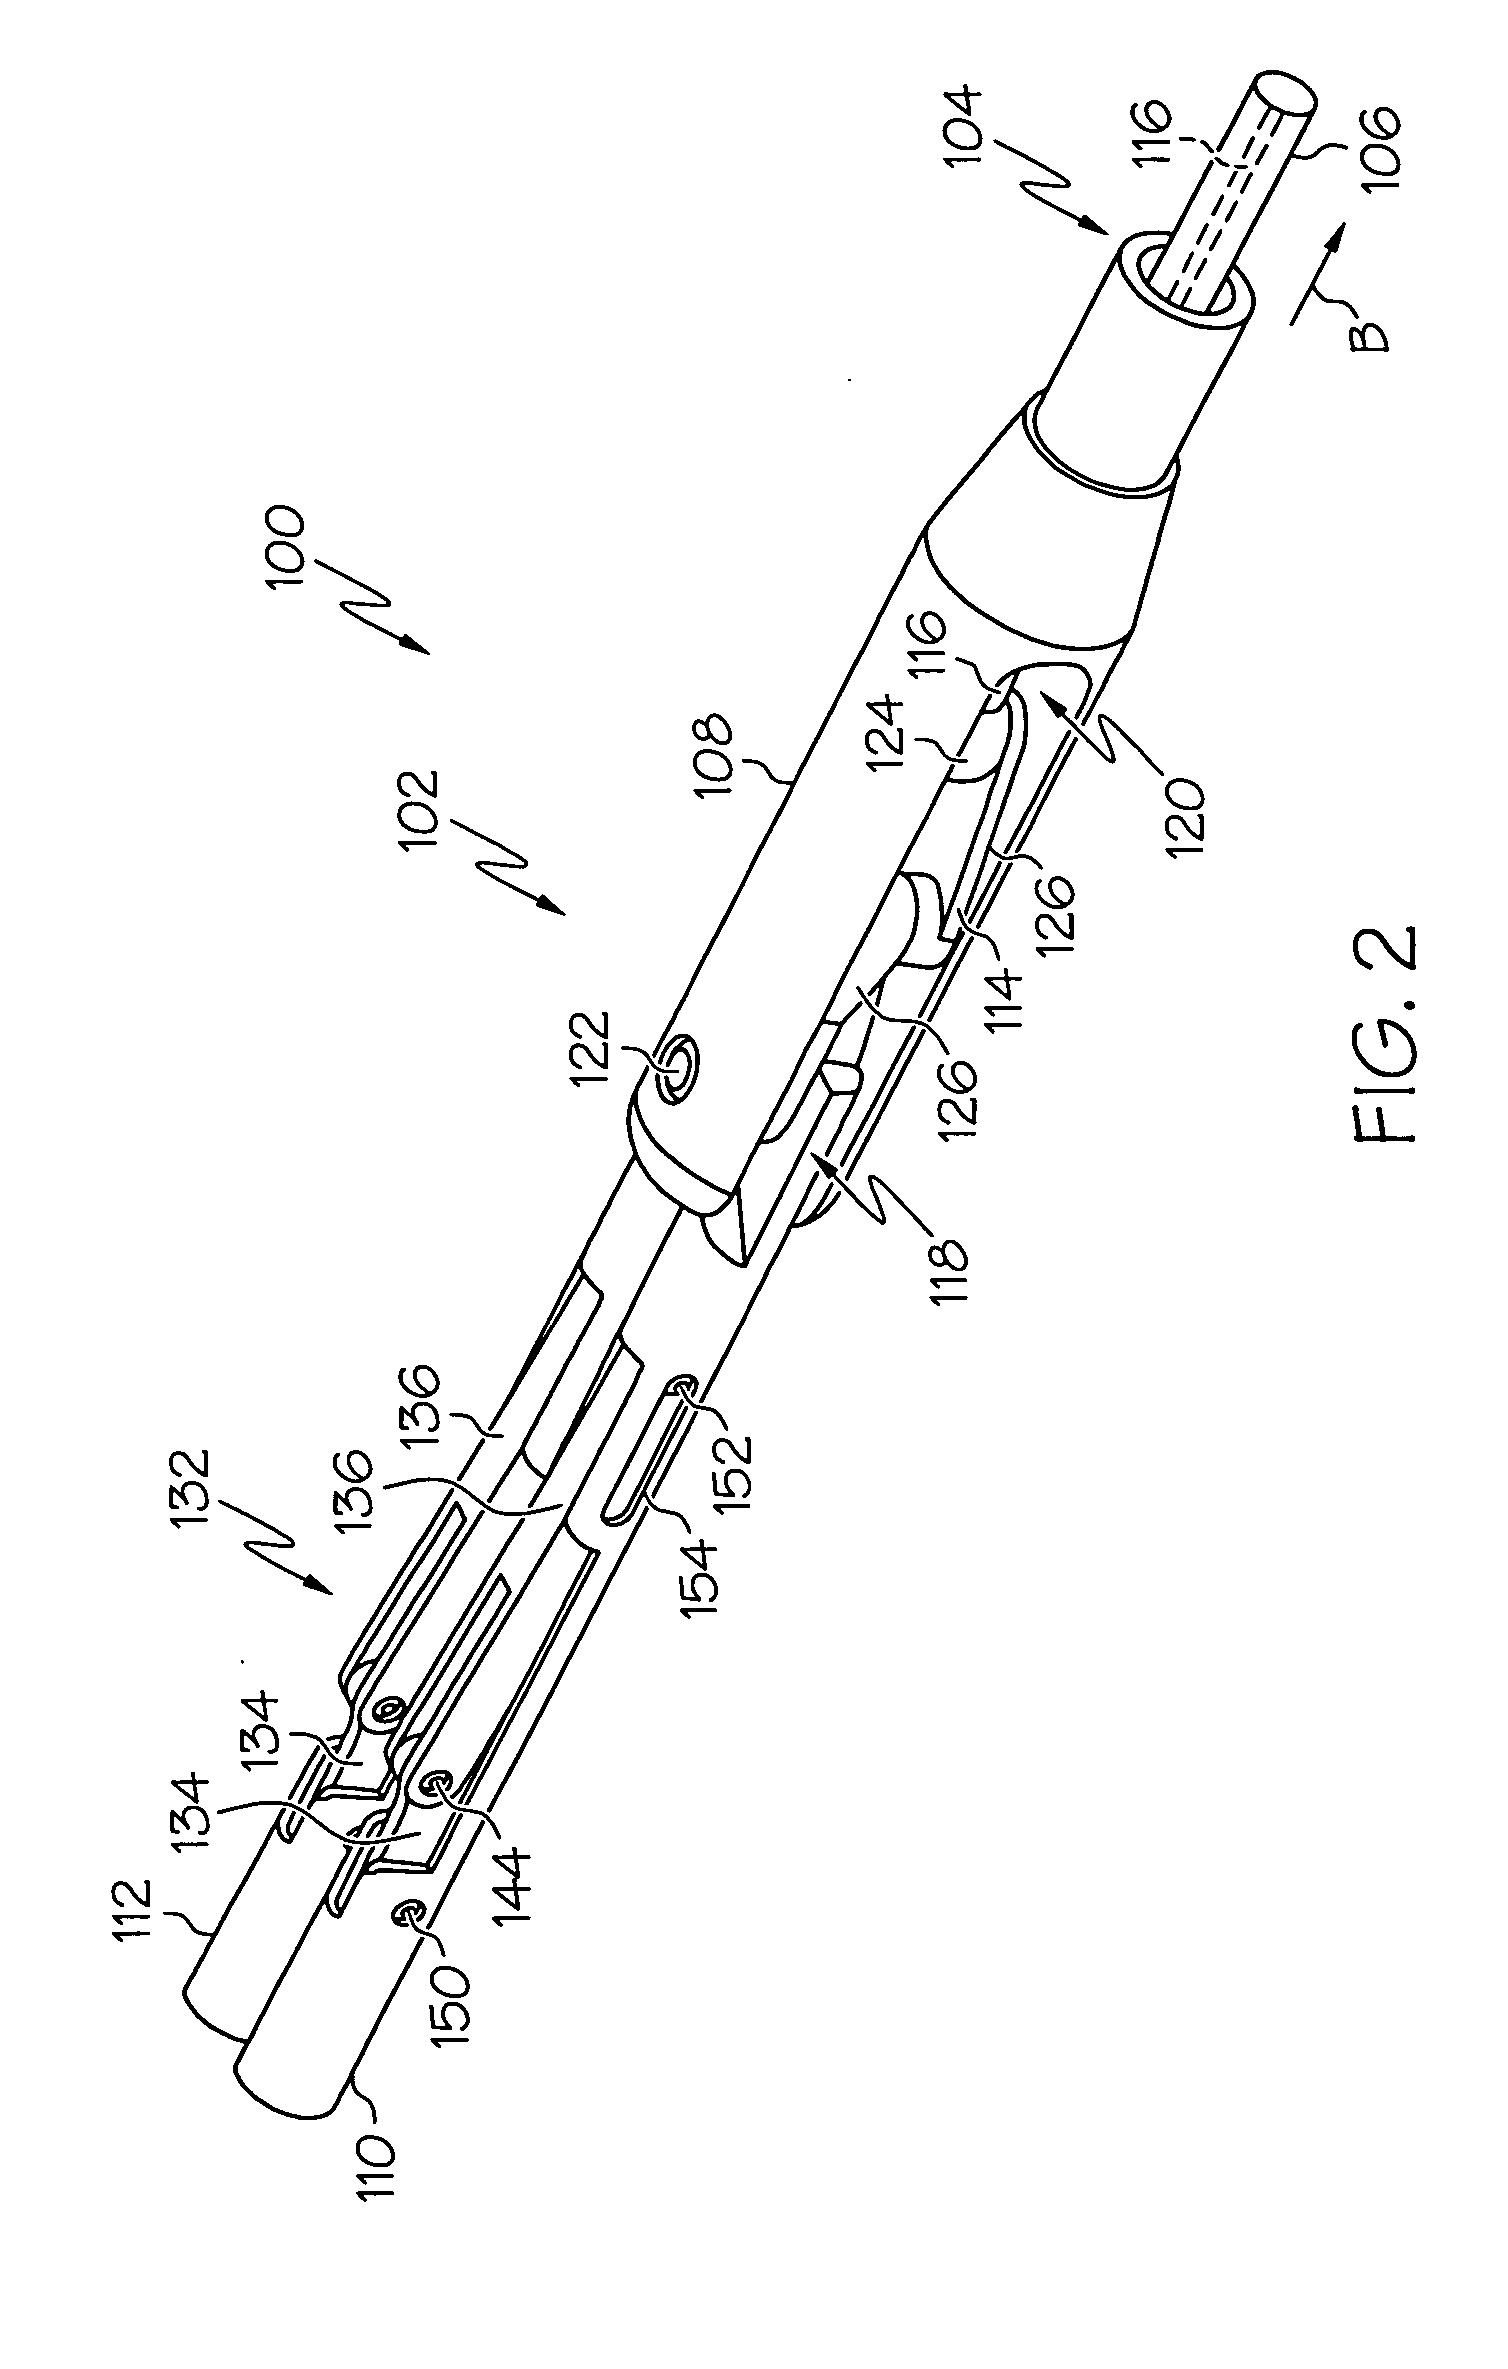 Apparatus and method for deploying a cutting element during an endoscopic mucosal resection